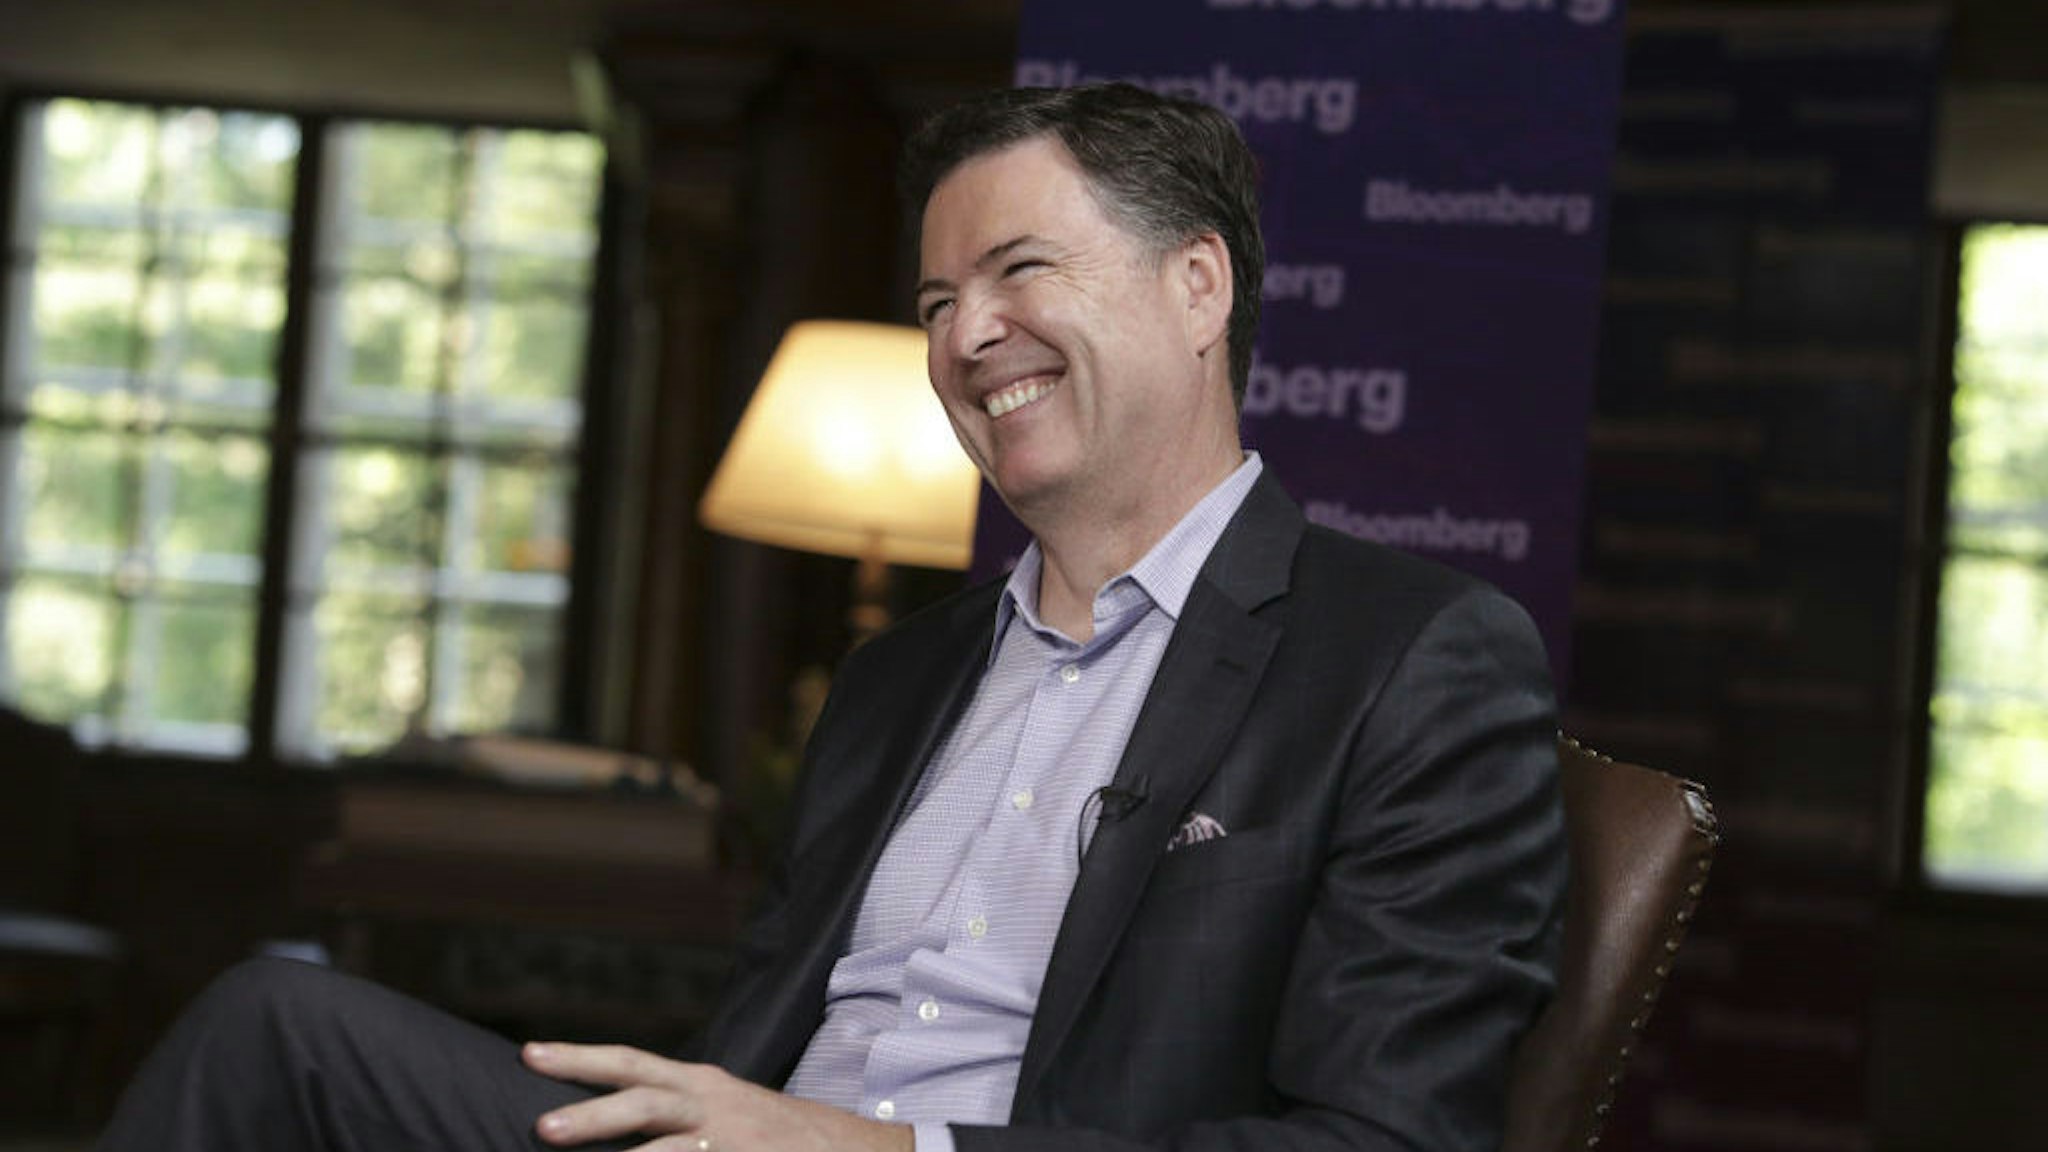 James Comey, former director of the Federal Bureau of Investigation (FBI), reacts during a Bloomberg Television interview in Salzburg, Austria, on Friday, June 21, 2019. Comey said he hopes President Donald Trump isn’t impeached because "that would let the American people off the hook." Photographer: Alex Kraus/Bloomberg